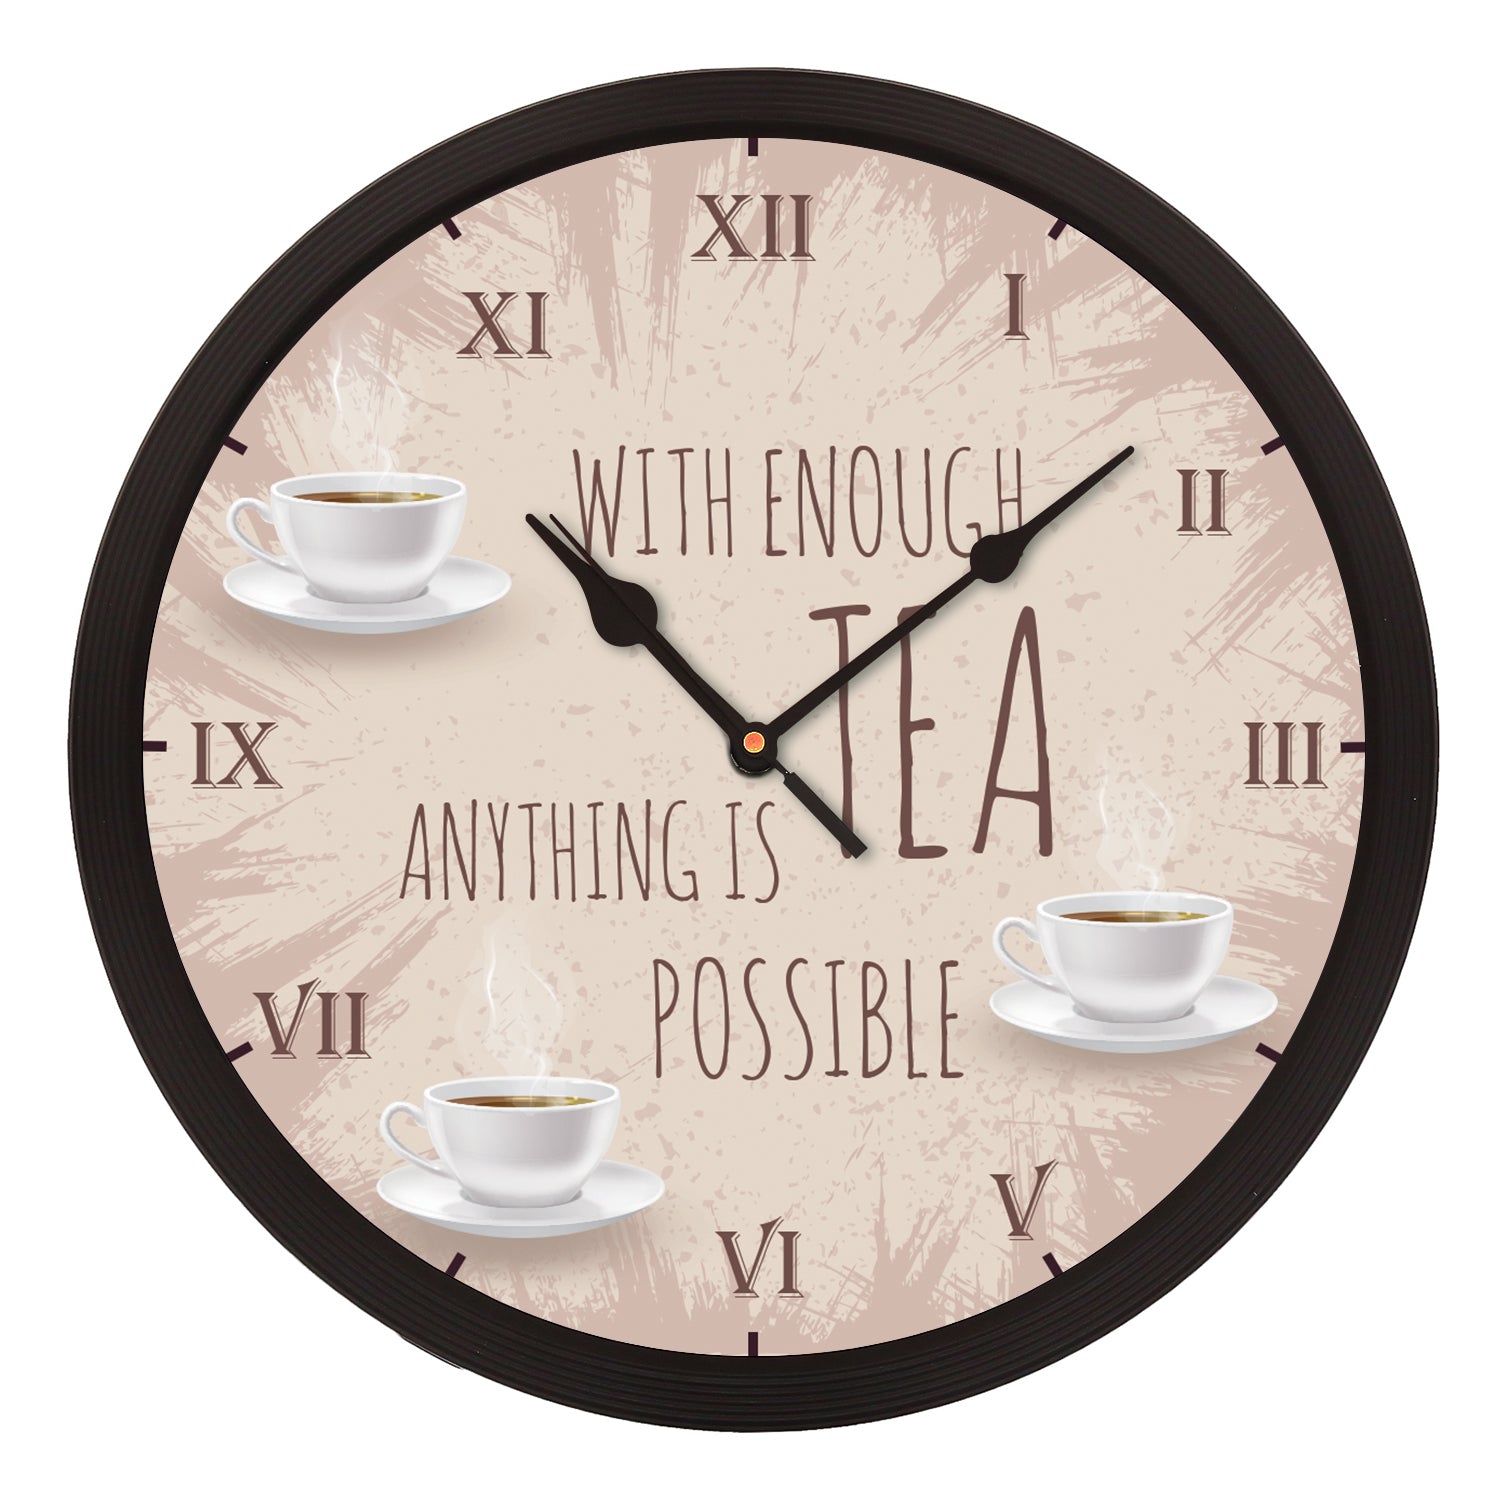 "With Enough Tea Anything Is Possible" Designer Round Analog Black Wall Clock